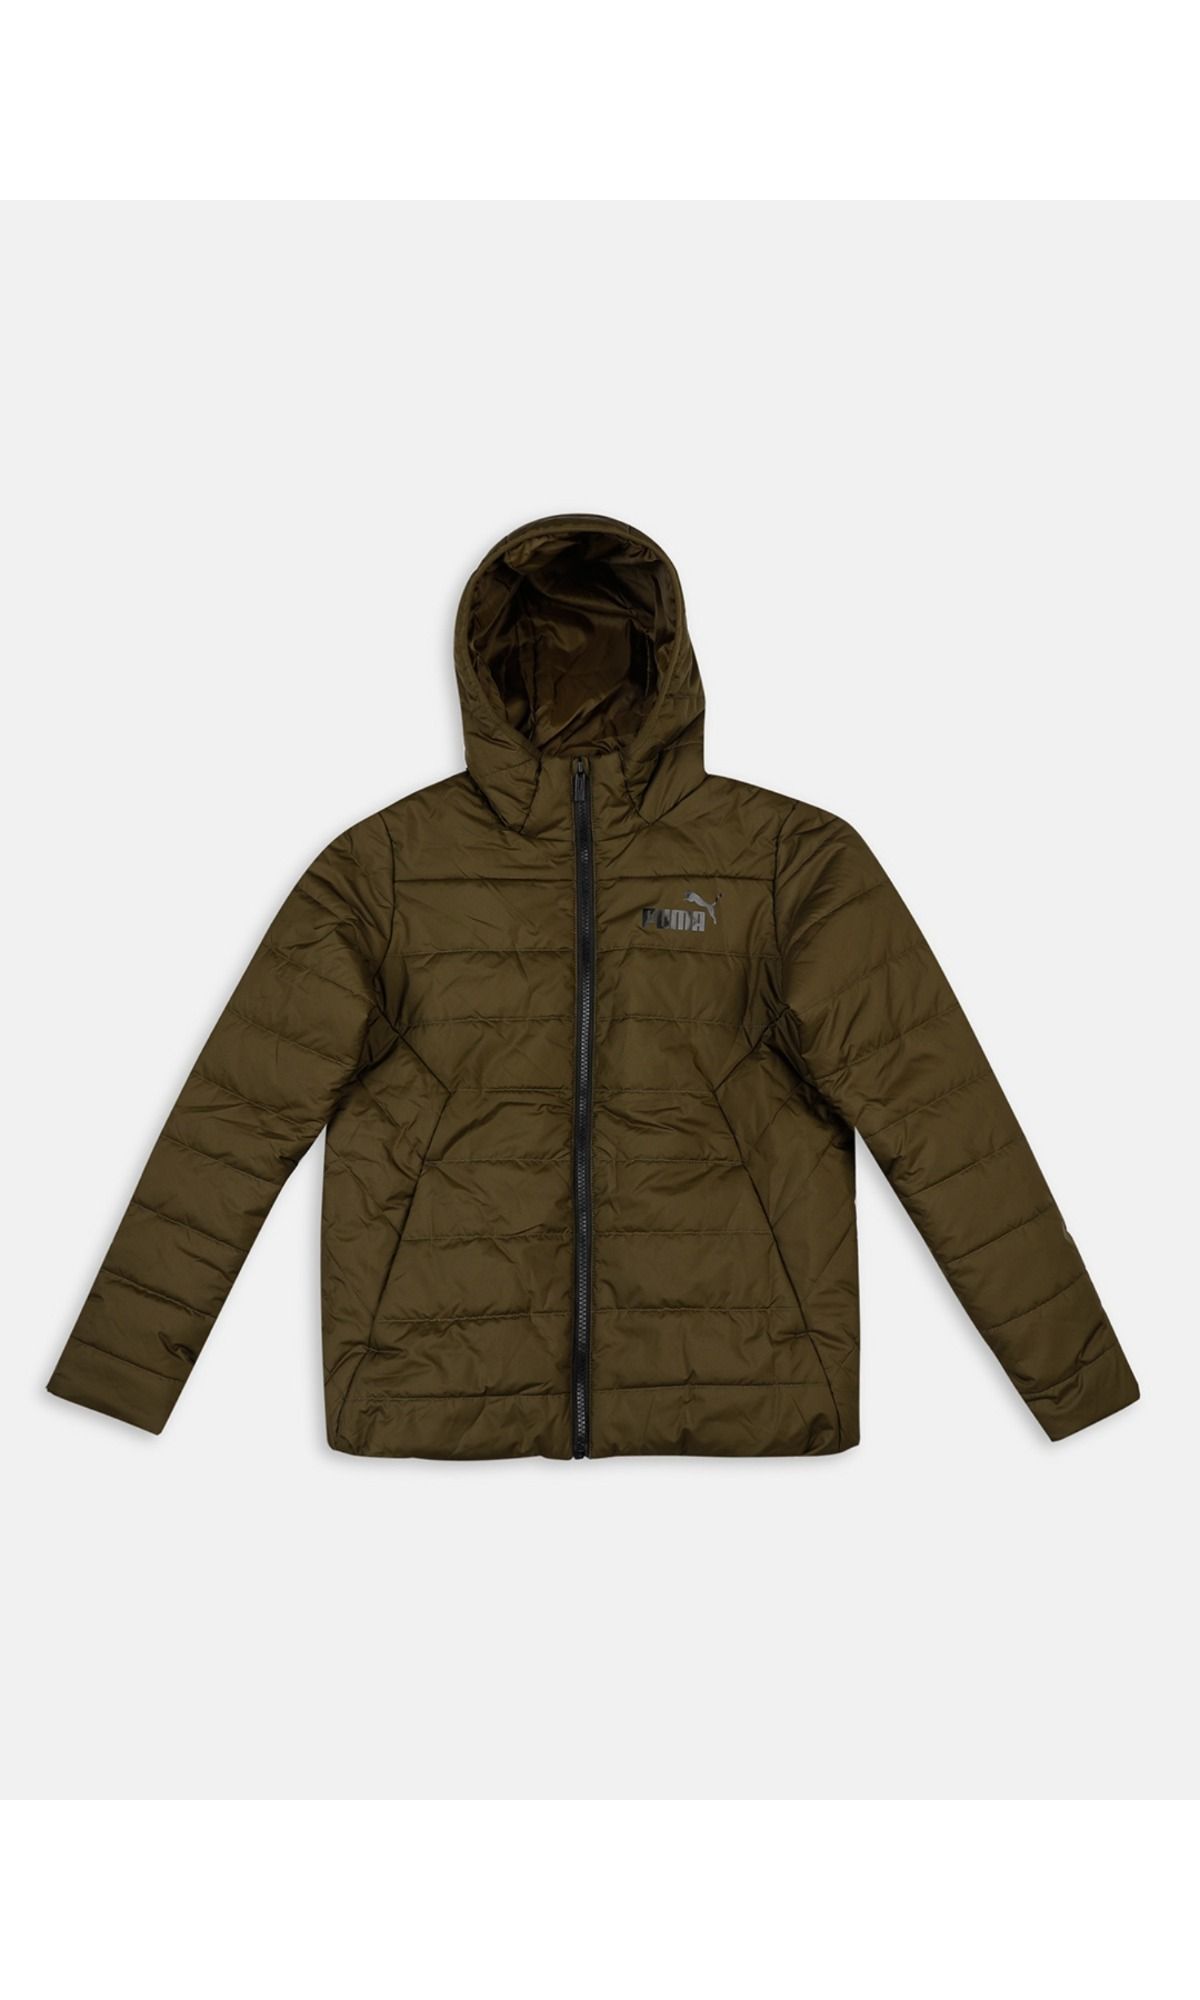 Buy Rag And Bone Jackets Online India - Rag And Bone Outlet